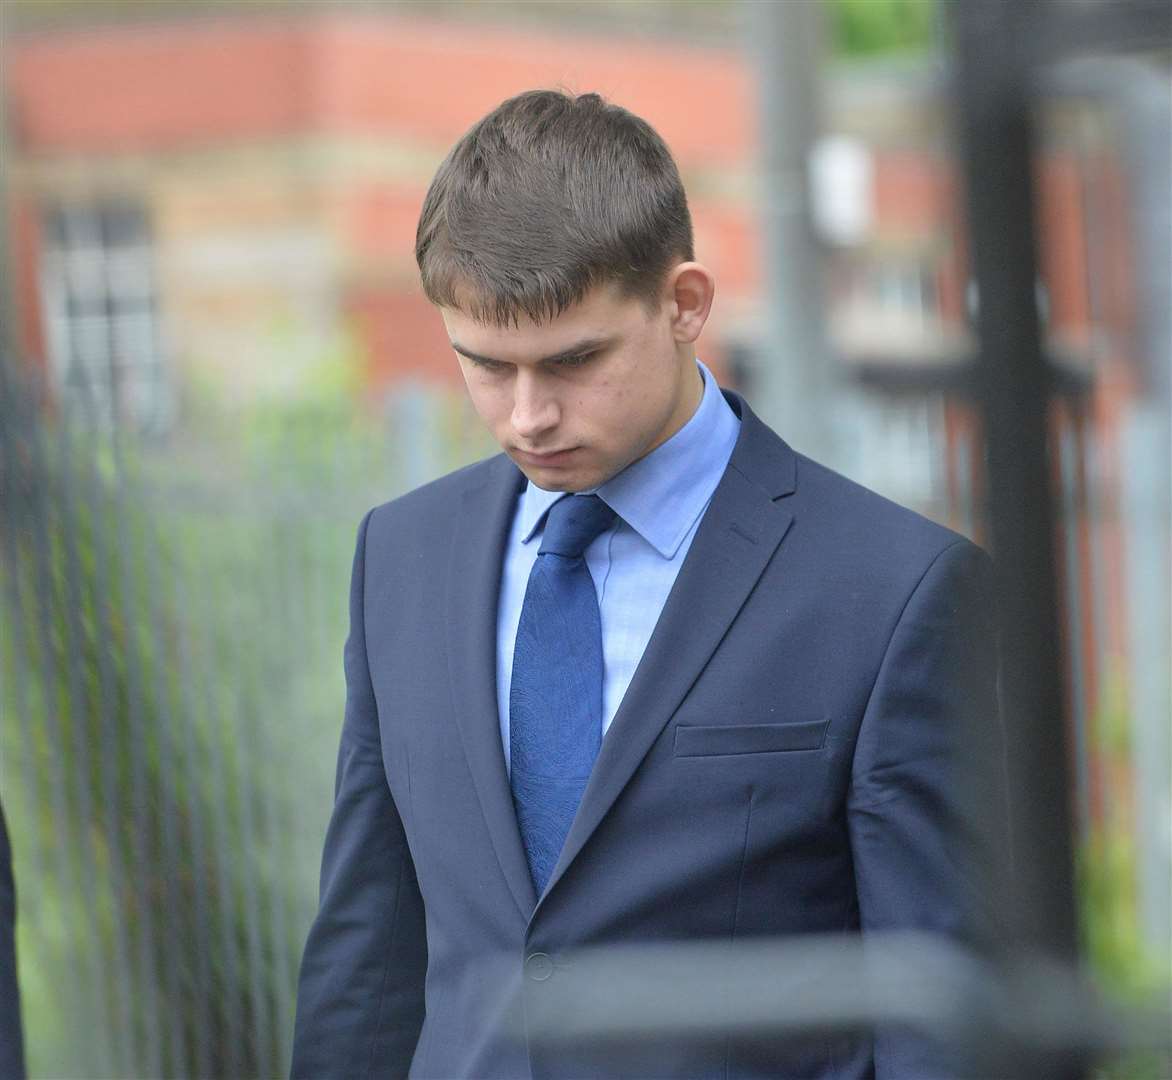 Daniel McFarlane has been convicted of two rapes at the High Court in Glasgow, the former medical student and aspiring athlete preyed on the victim at her flat in Glasgow's Finnieston area as well as his own home in nearby Hillhead. He was jailed for 5 years at court this morning